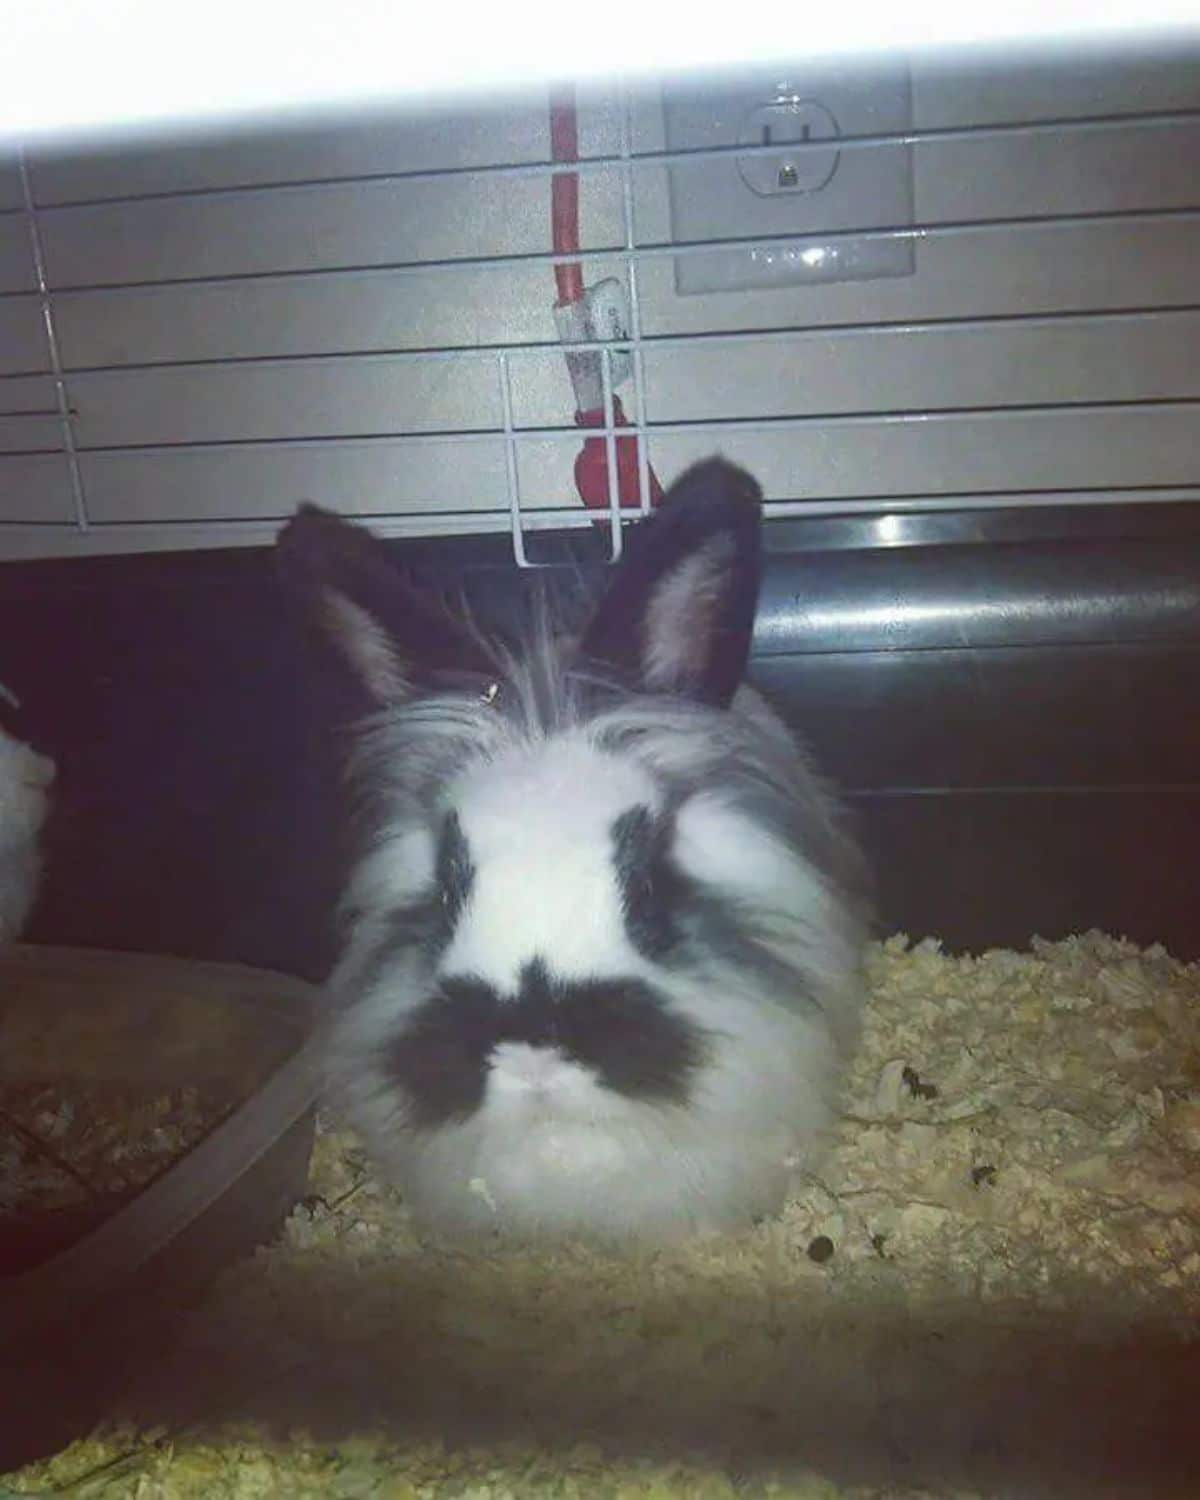 white rabbit with black markings around eyes and a black mustache